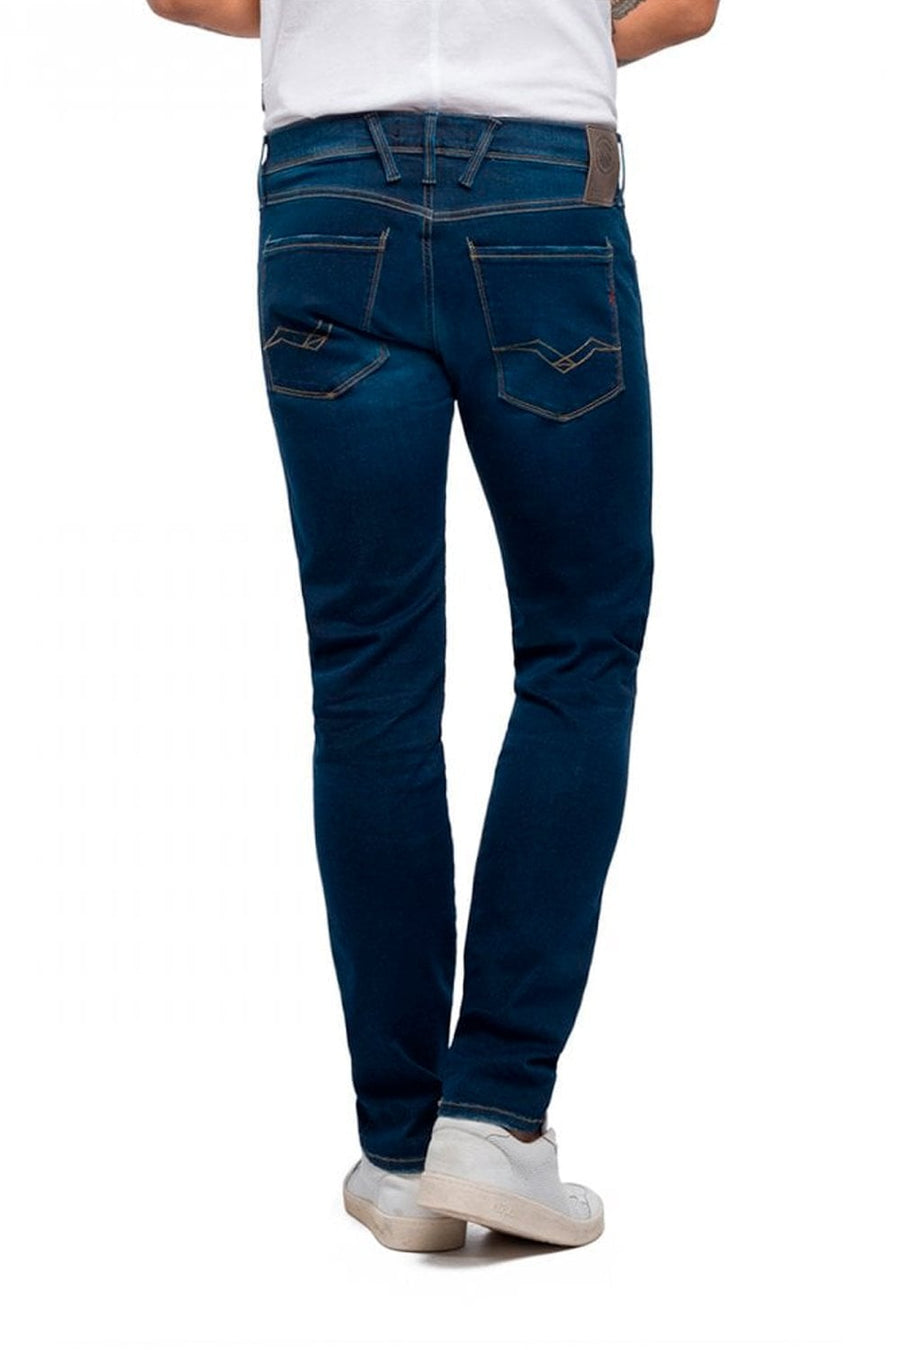 Buy the Replay Hyperflex Jeans Blue at Intro. Spend £50 for free UK delivery. Official stockists. We ship worldwide.